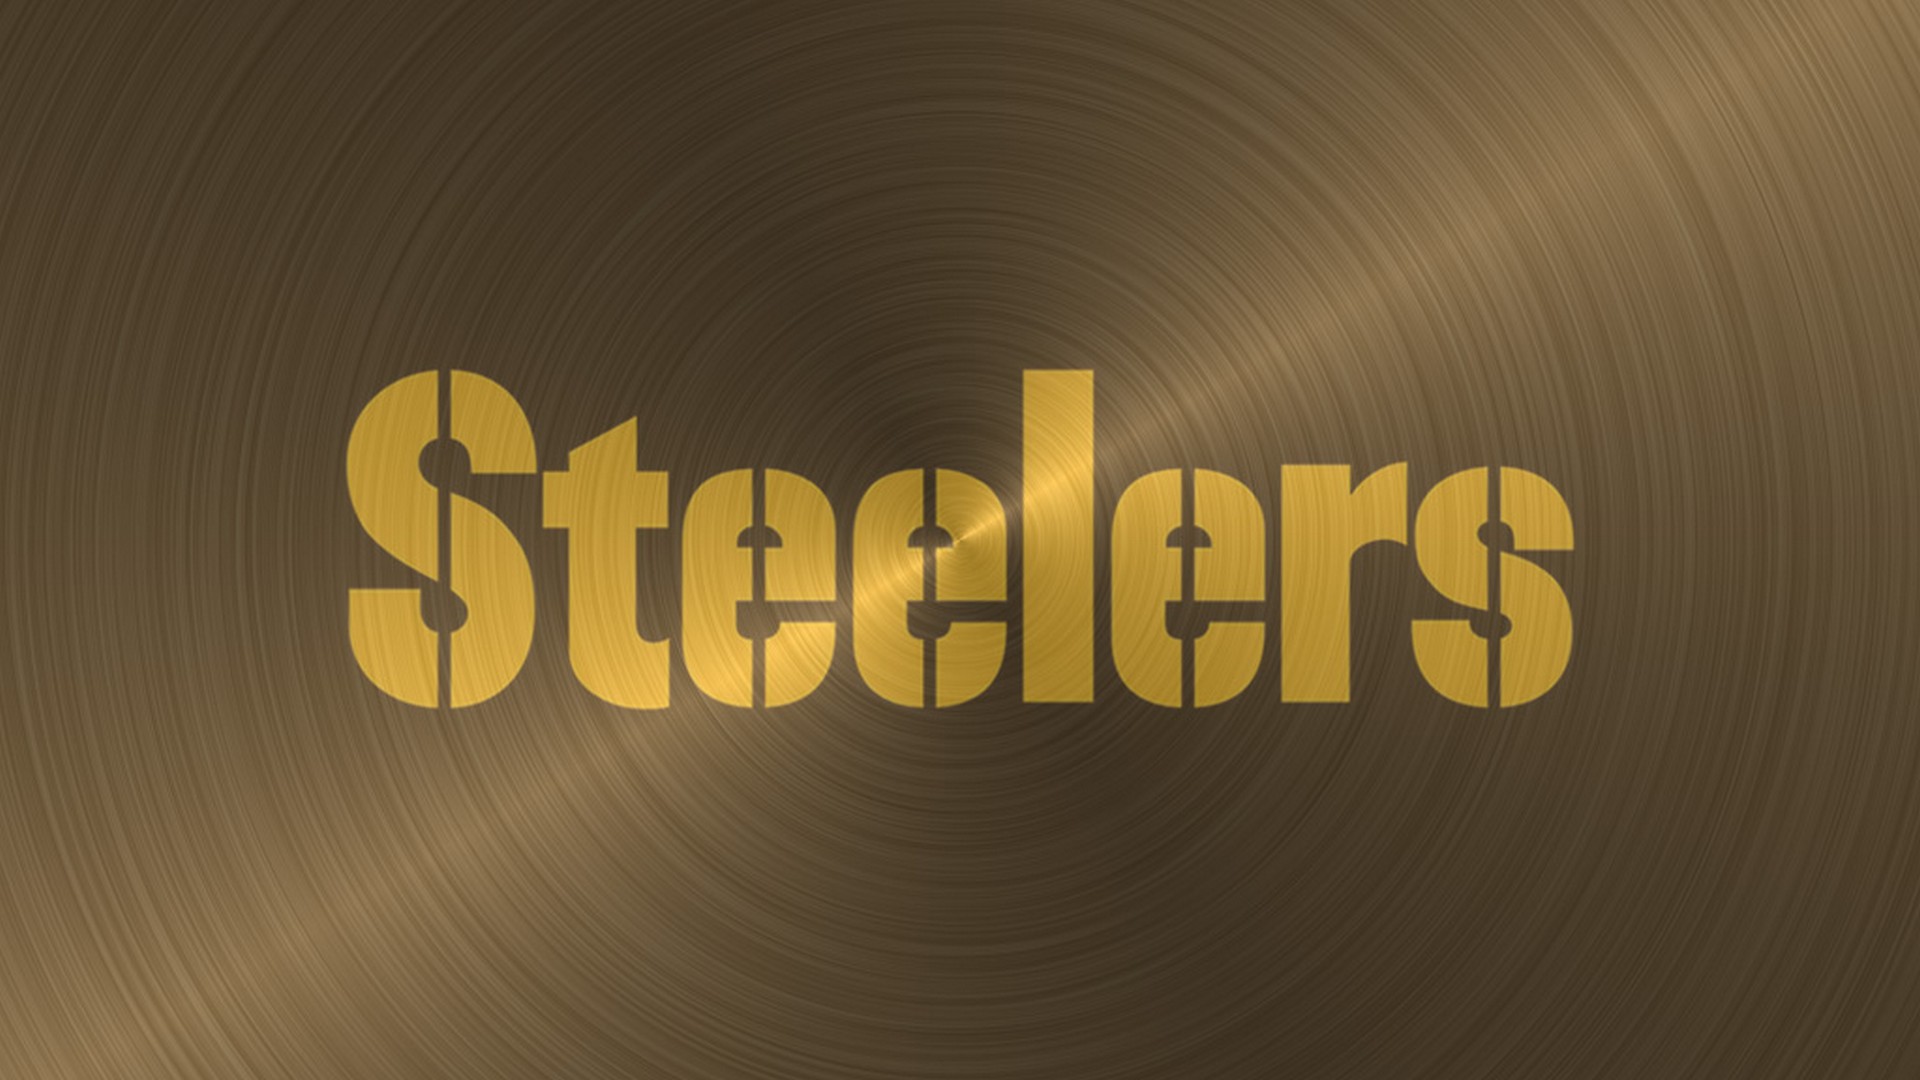 Steelers Football For PC Wallpaper With Resolution 1920X1080 pixel. You can make this wallpaper for your Mac or Windows Desktop Background, iPhone, Android or Tablet and another Smartphone device for free